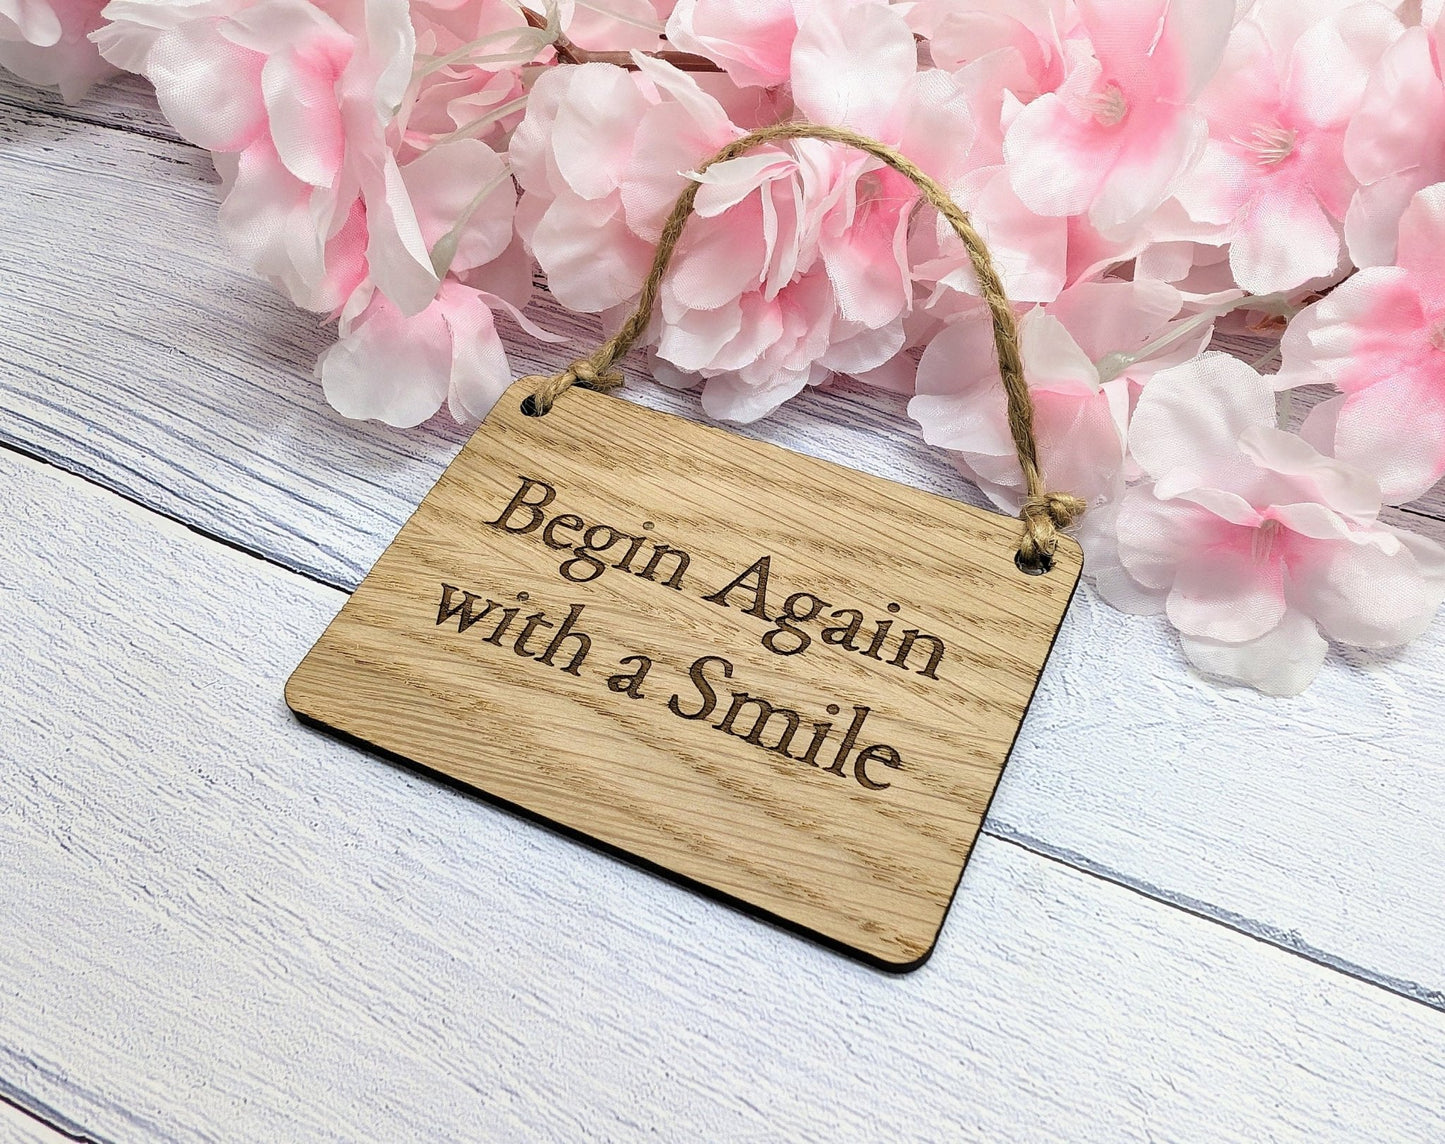 Begin Again with a Smile" - Uplifting Oak Sign, Handmade in Wales, Eco-Friendly, Available in 4 Sizes - CherryGroveCraft